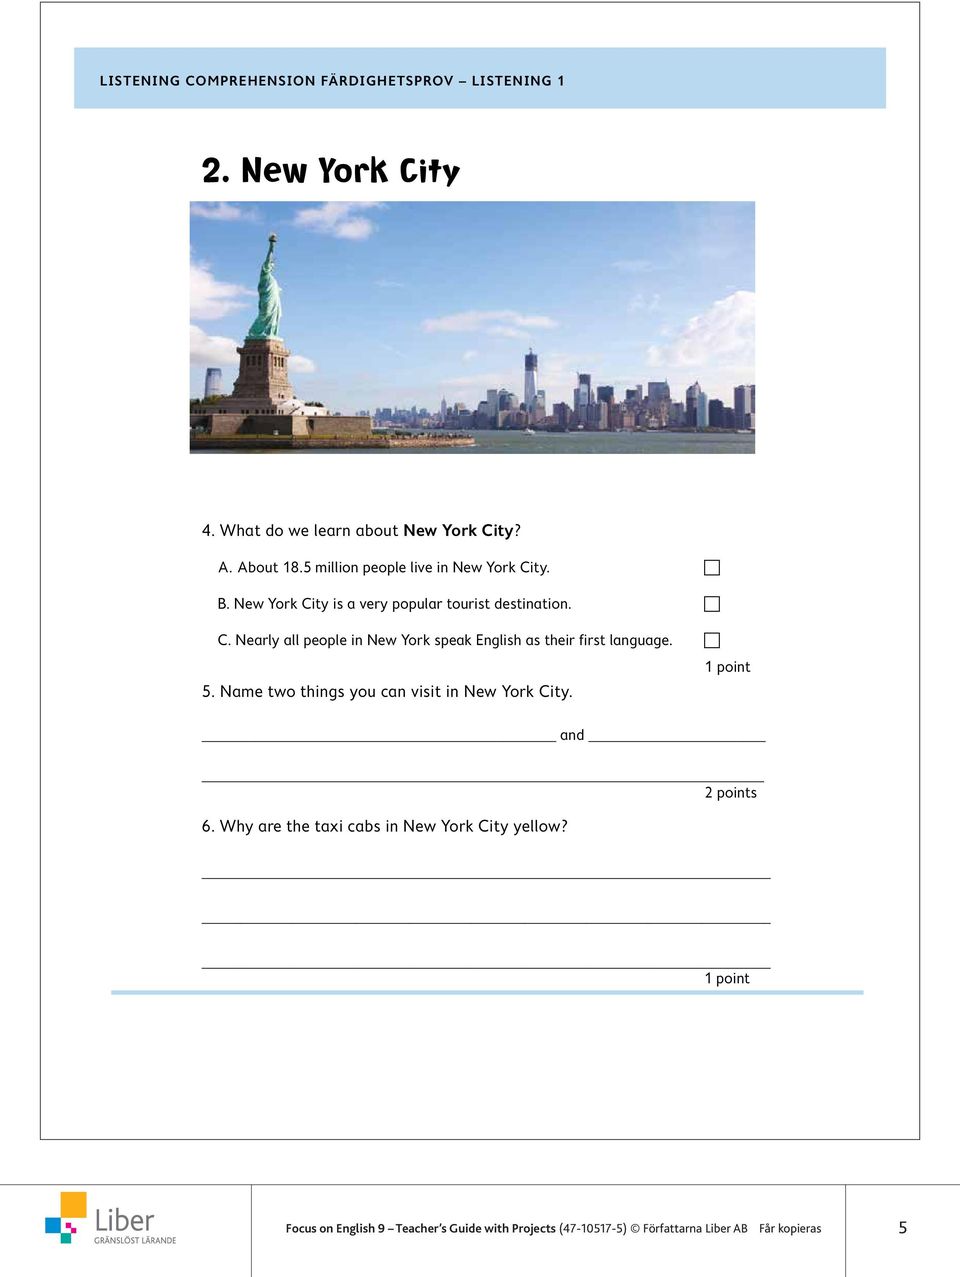 Nearly all people in New York speak English as their first language. c 5. Name two things you can visit in New York City. and 2 points 6.